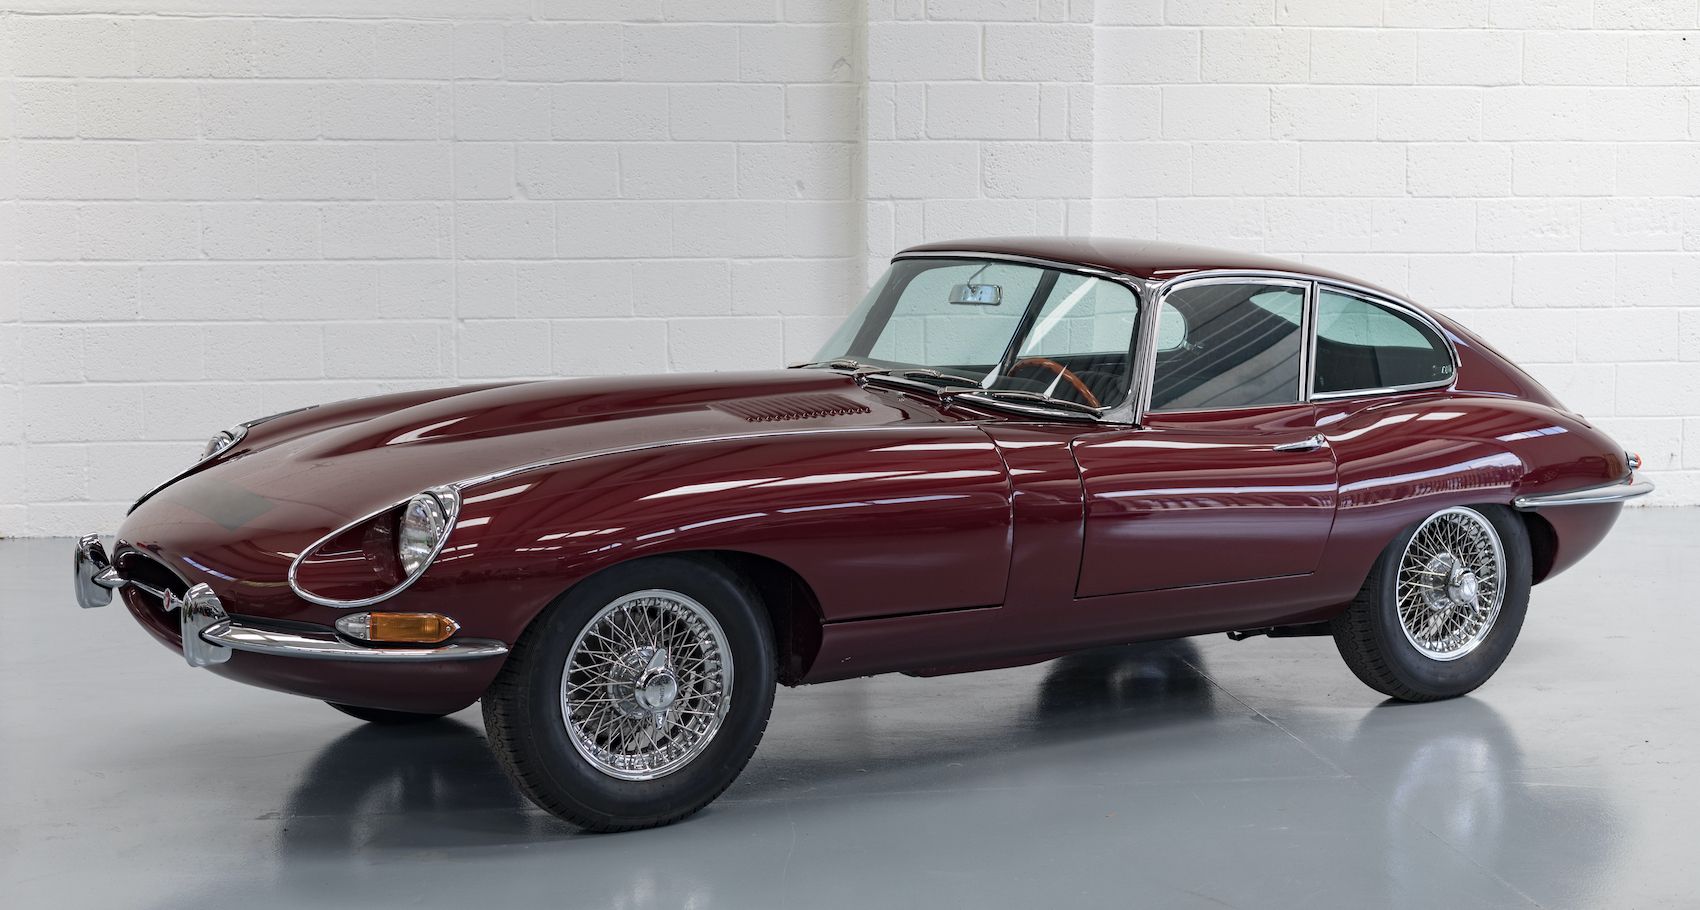 Here's How Electrogenic Has Made It Easy To Electromod Iconic Classic Cars